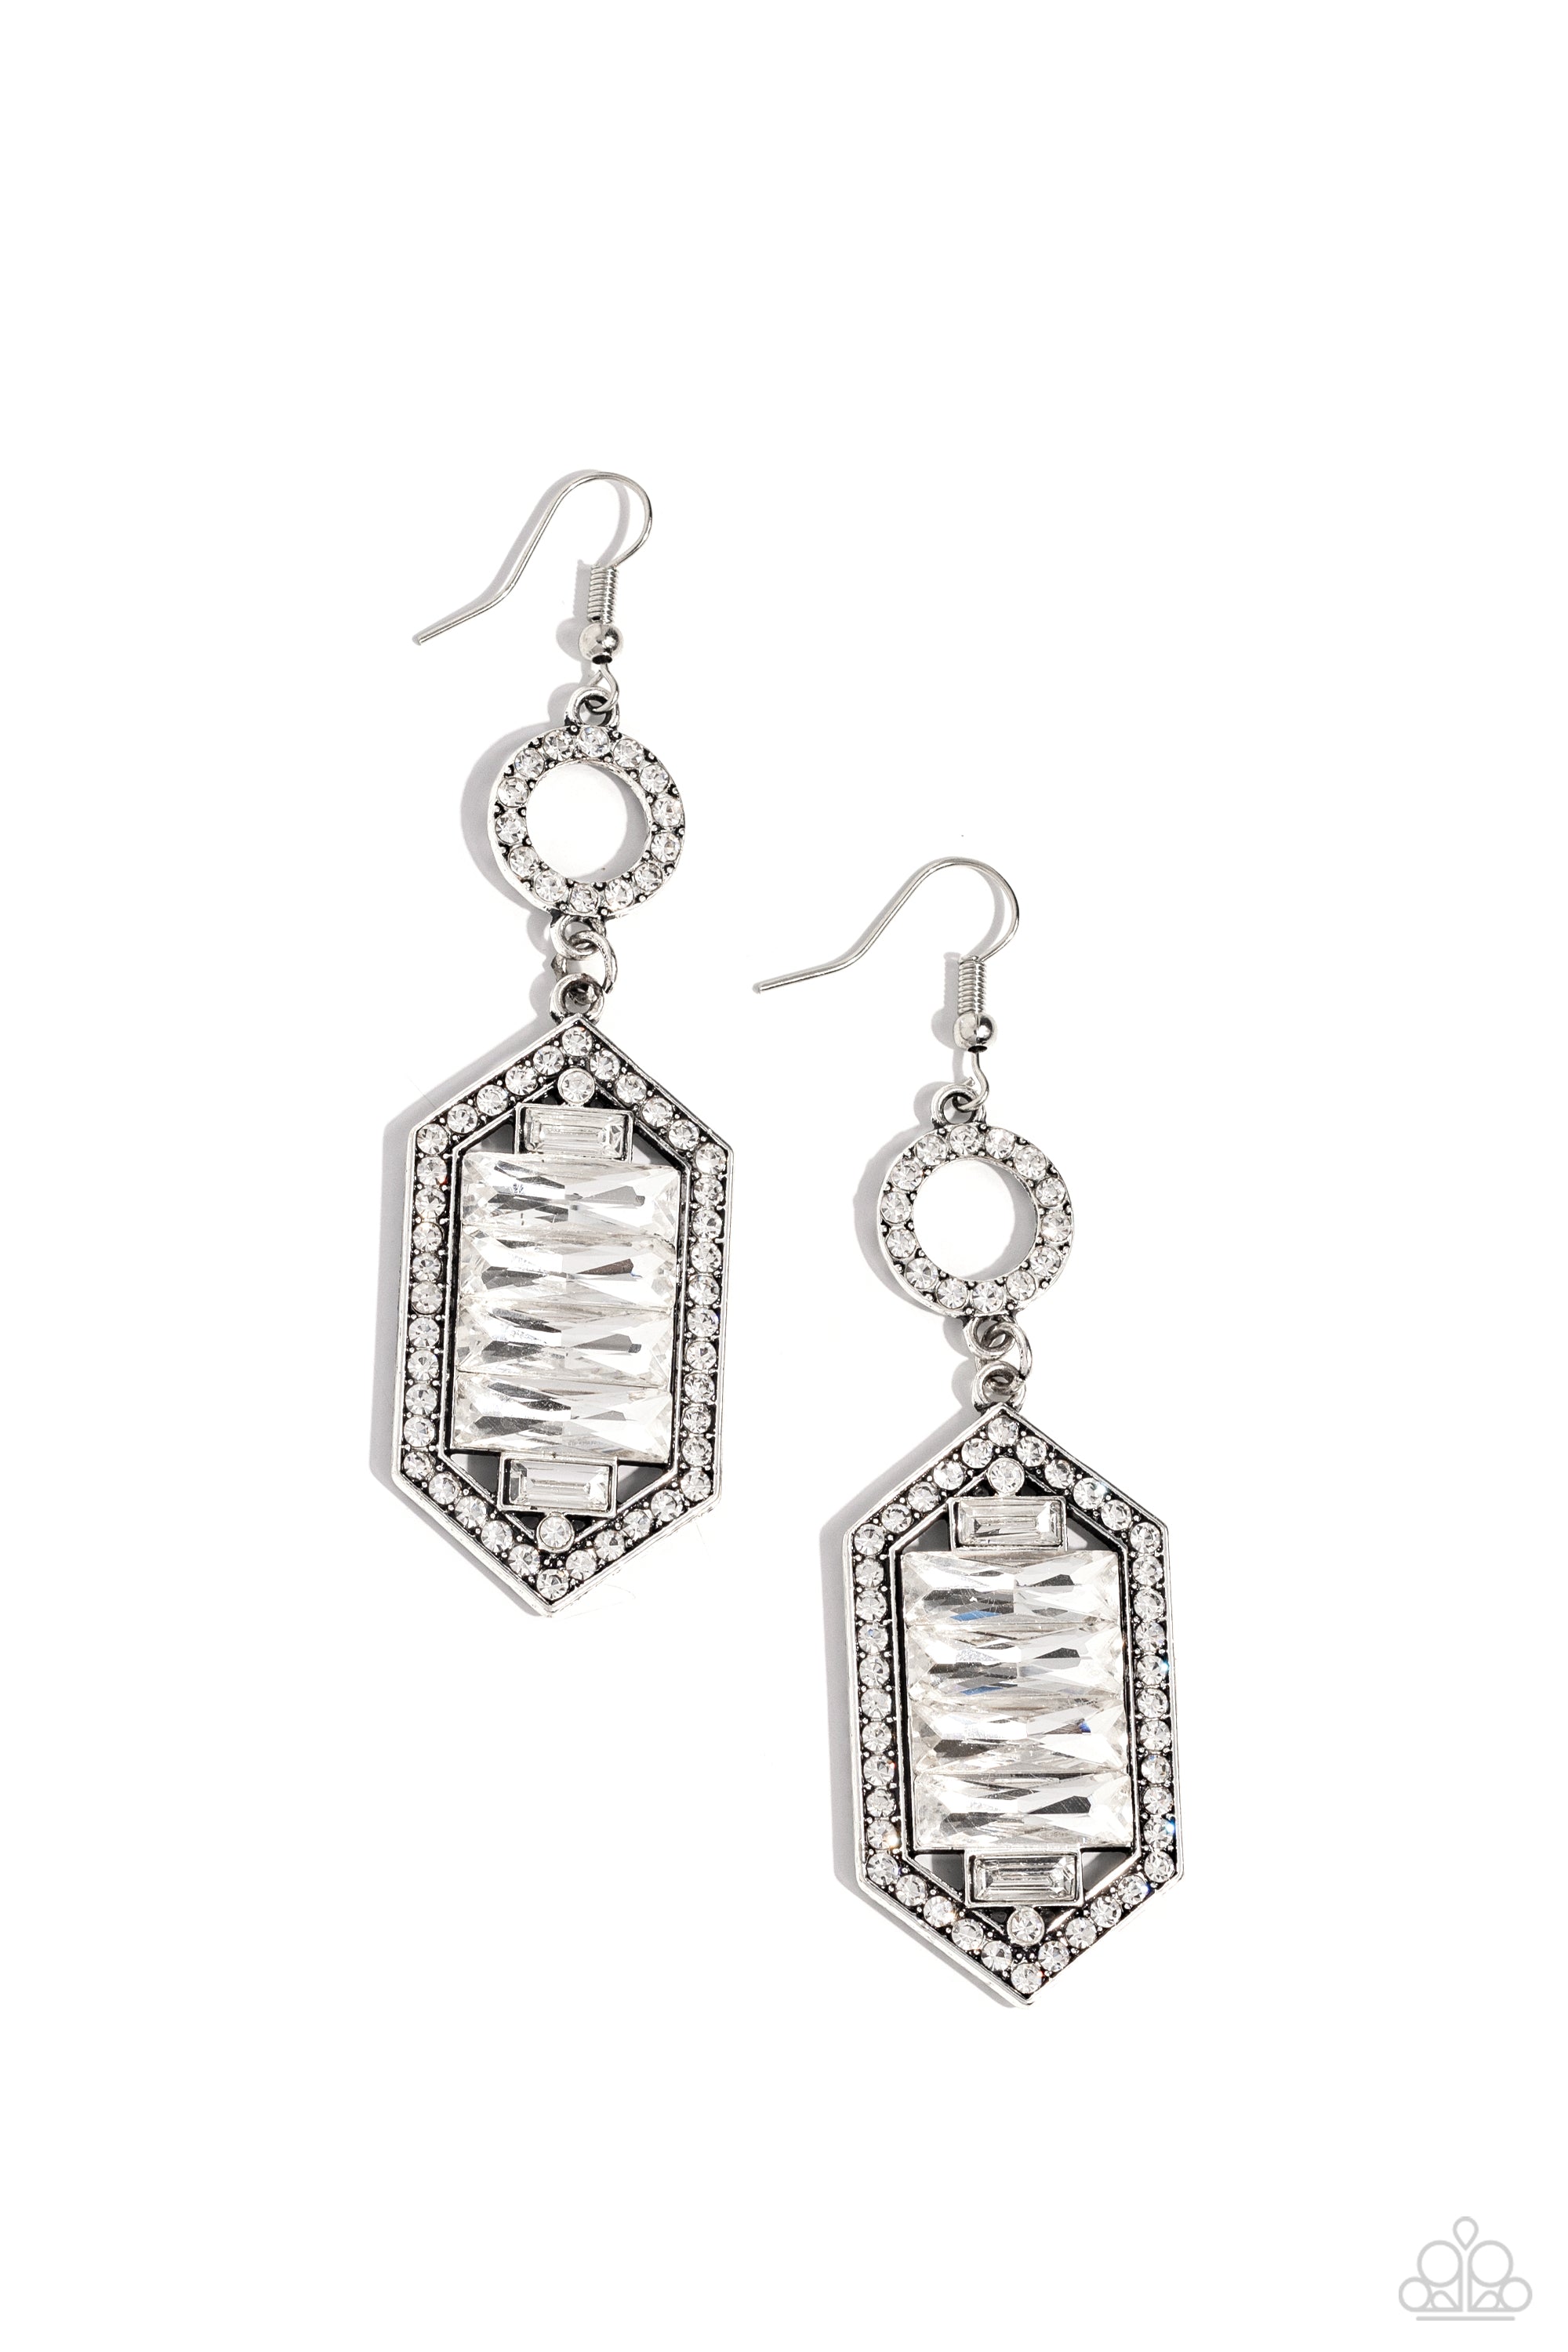 COMBUSTIBLE CRAVING WHITE-EARRINGS